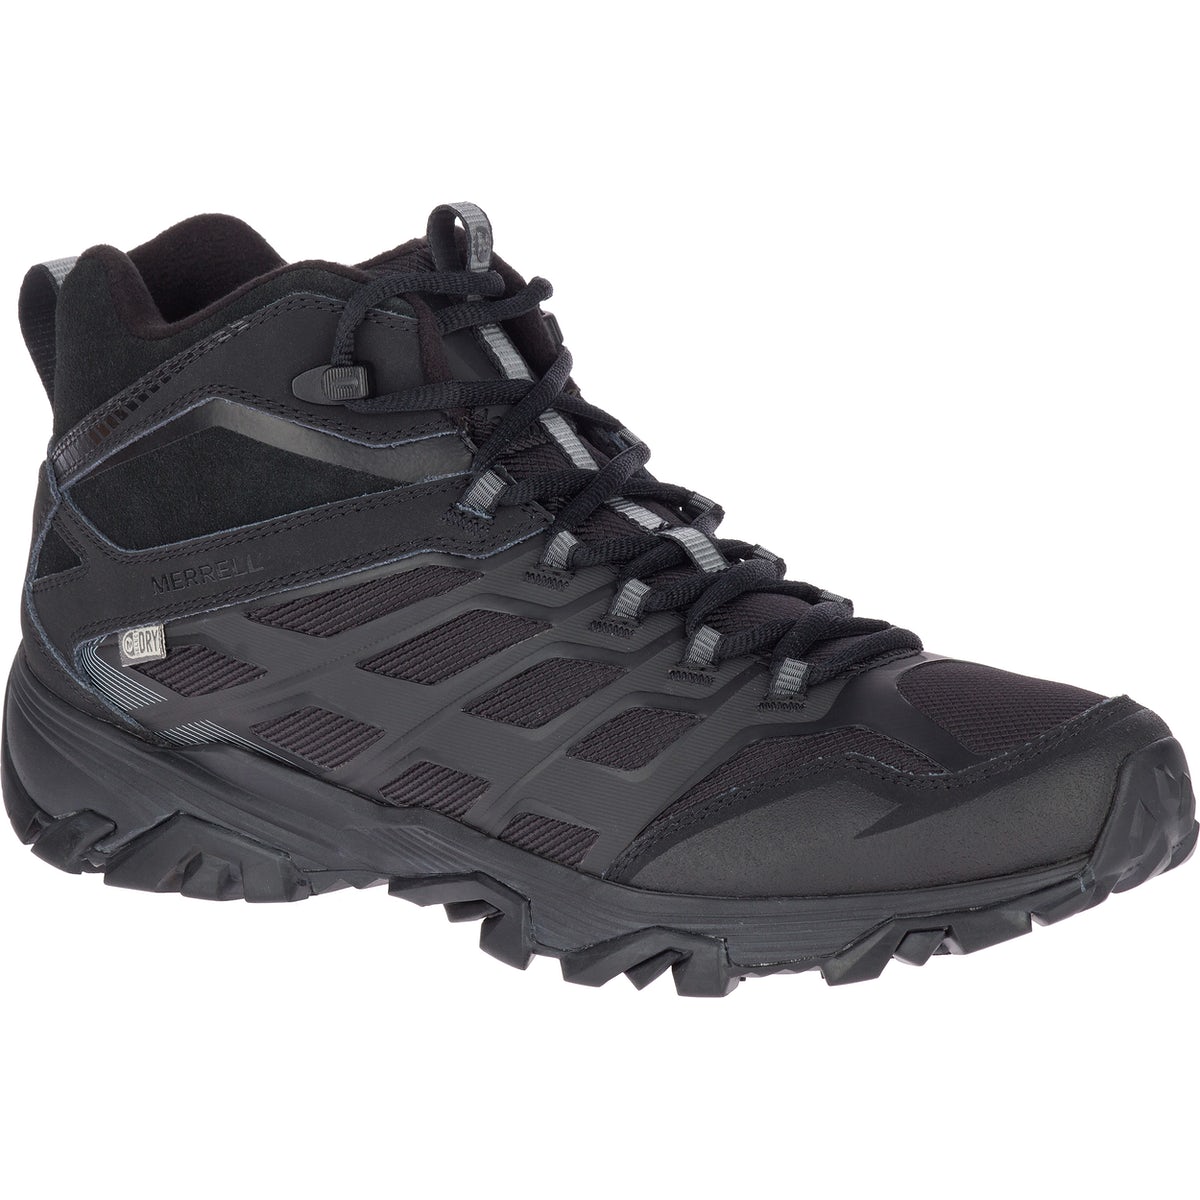 Merrell Men's Moab FST Ice+Thermo Moab Winter Boots Black